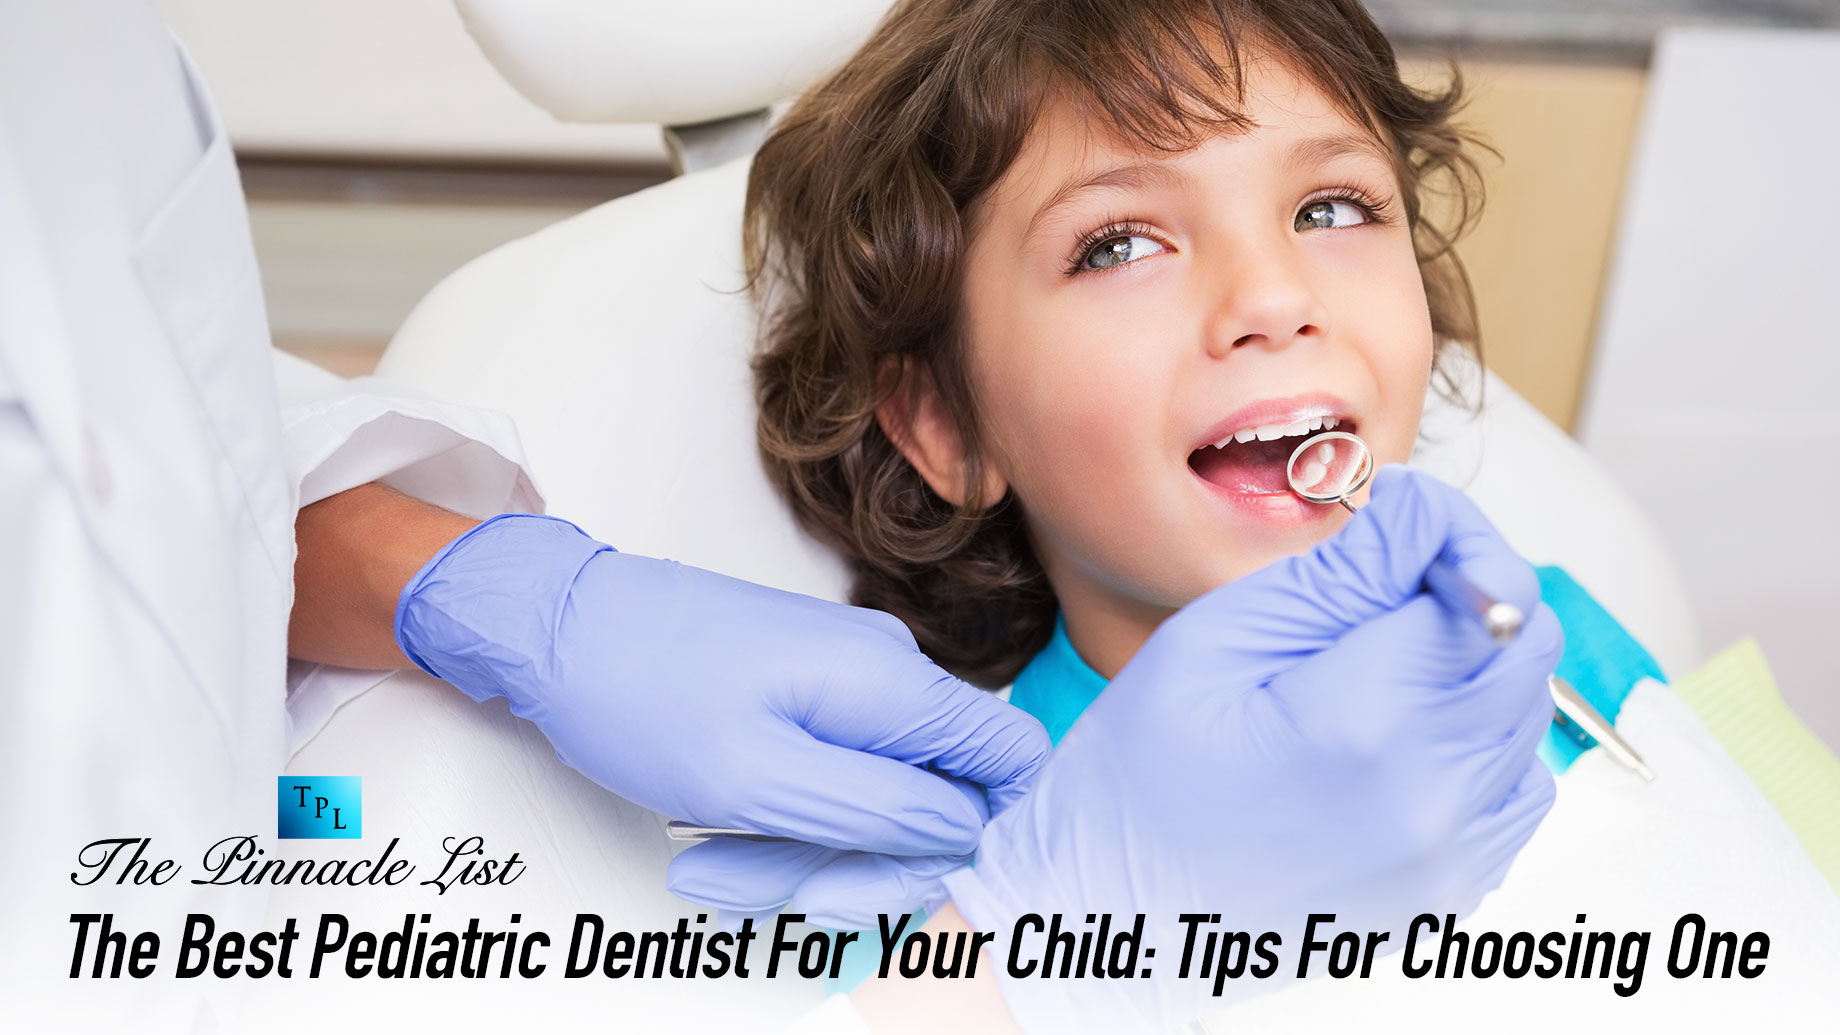 The Best Pediatric Dentist For Your Child: Tips For Choosing One